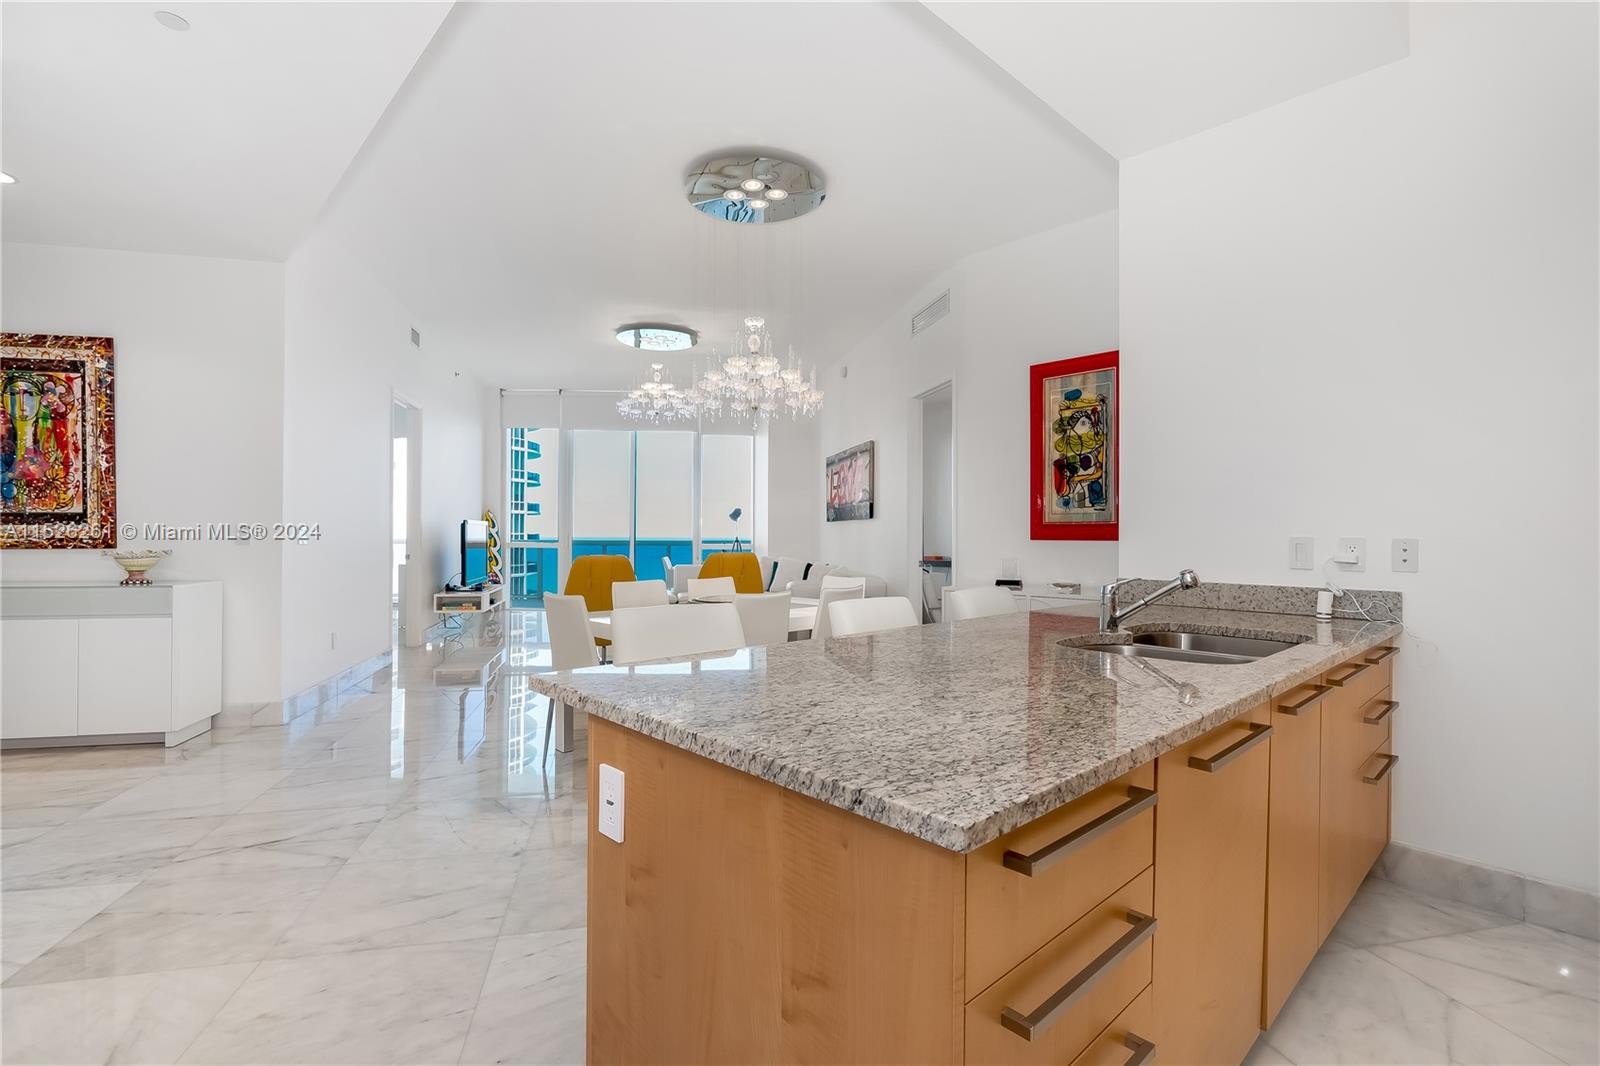 30. 15901 Collins Ave (Avail 6/1-11/30)